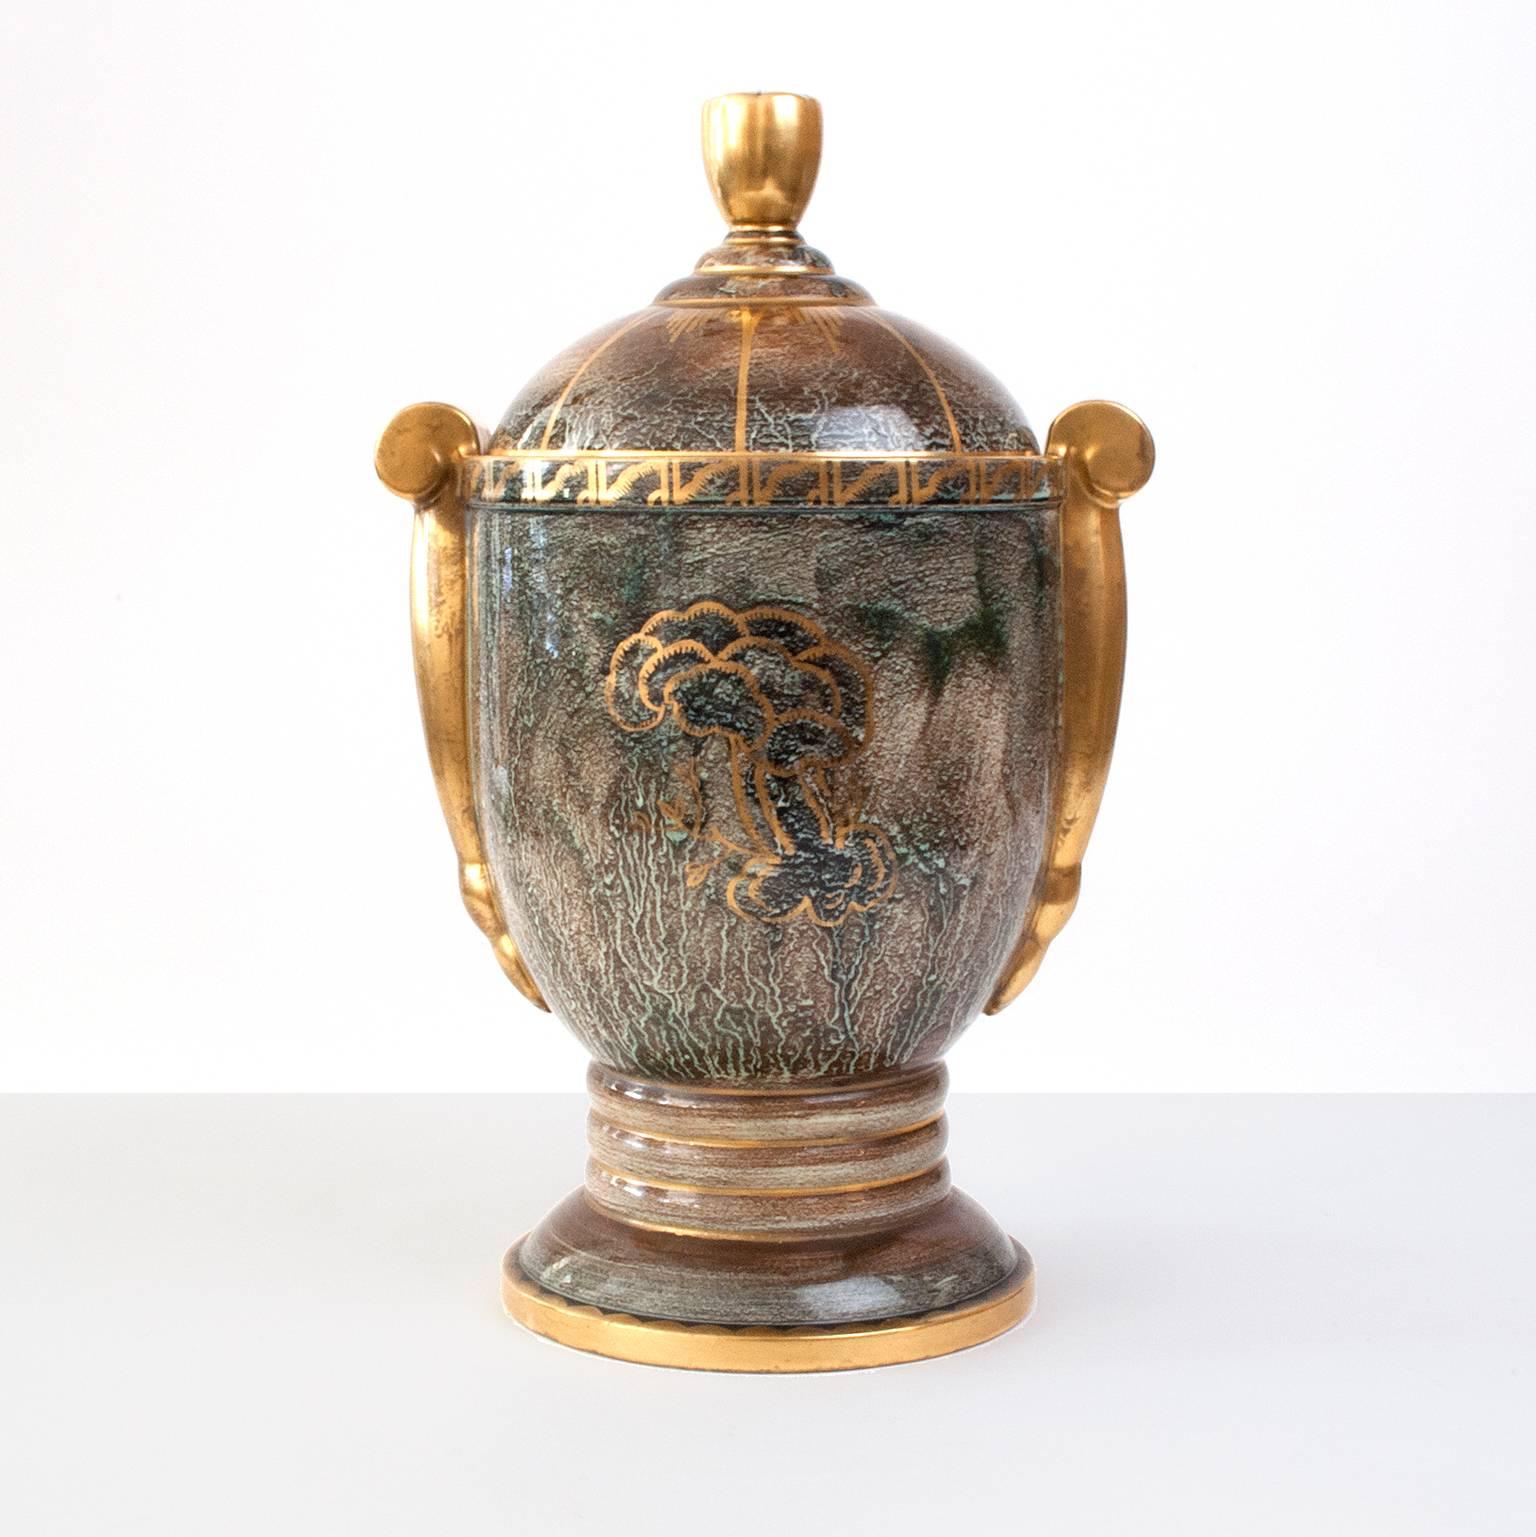 Impressive and rare Swedish Art Deco ceramic covered urn in green and gold luster glaze hand decorated with gold. Designed by Josef Ekberg for Gustavsberg, dated 1933. Excellent condition. Measures: Height 16